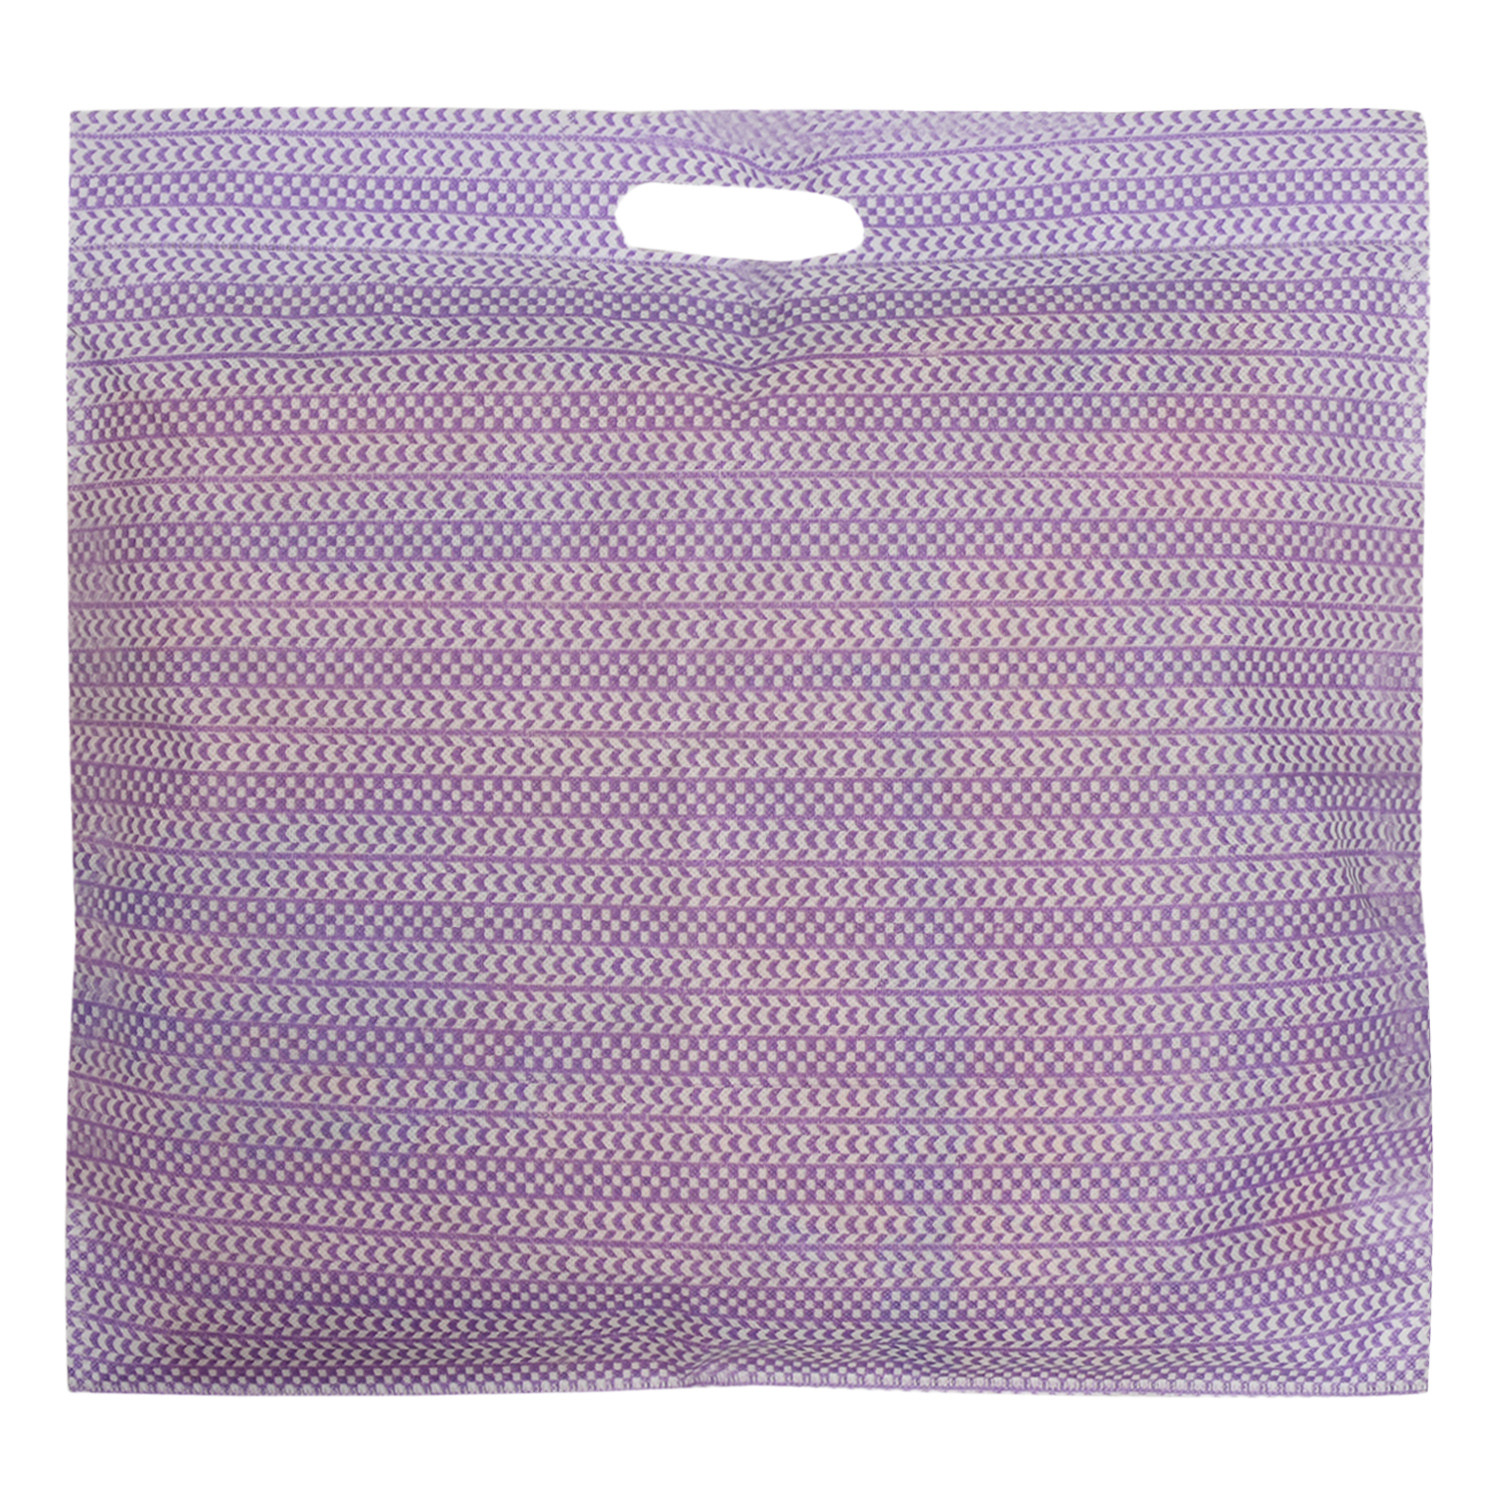 Kuber Industries Non-Woven Single Saree Covers With Transparent Window With Handle Pack of 24 (Purple & Pink)